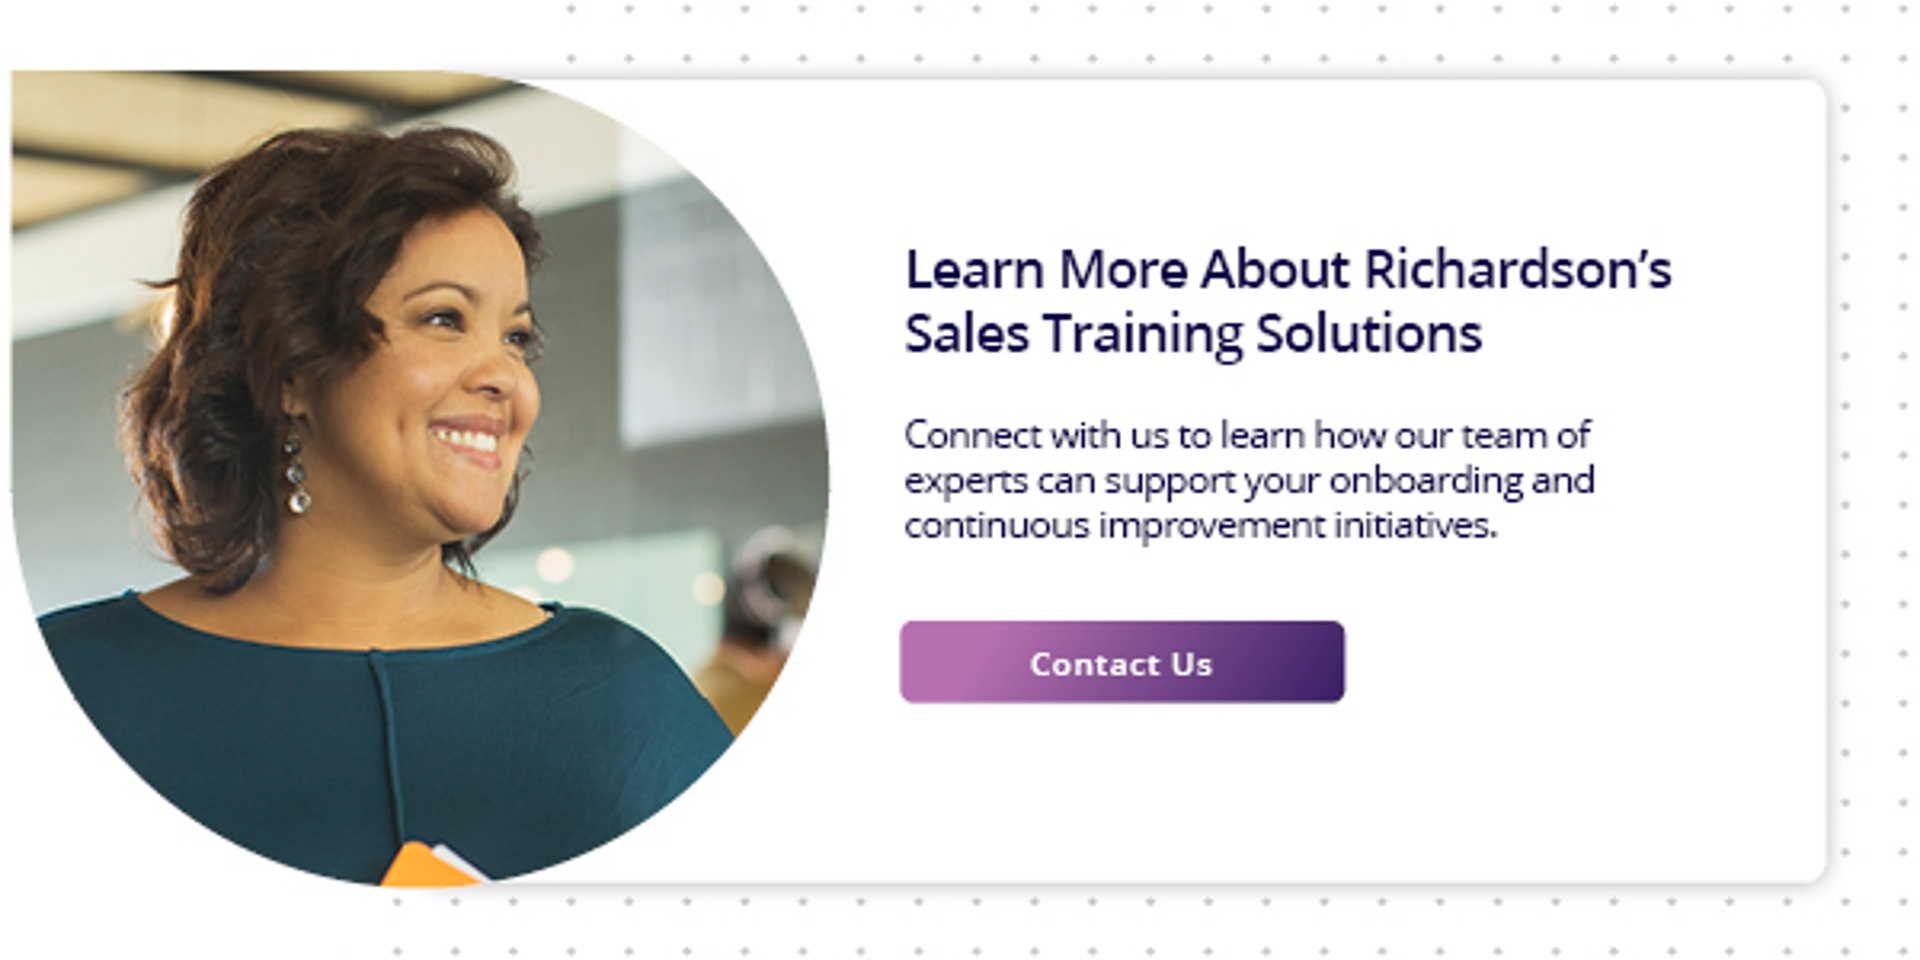 click here to contact richardsont to learn how we can help your team achieve their sales goals